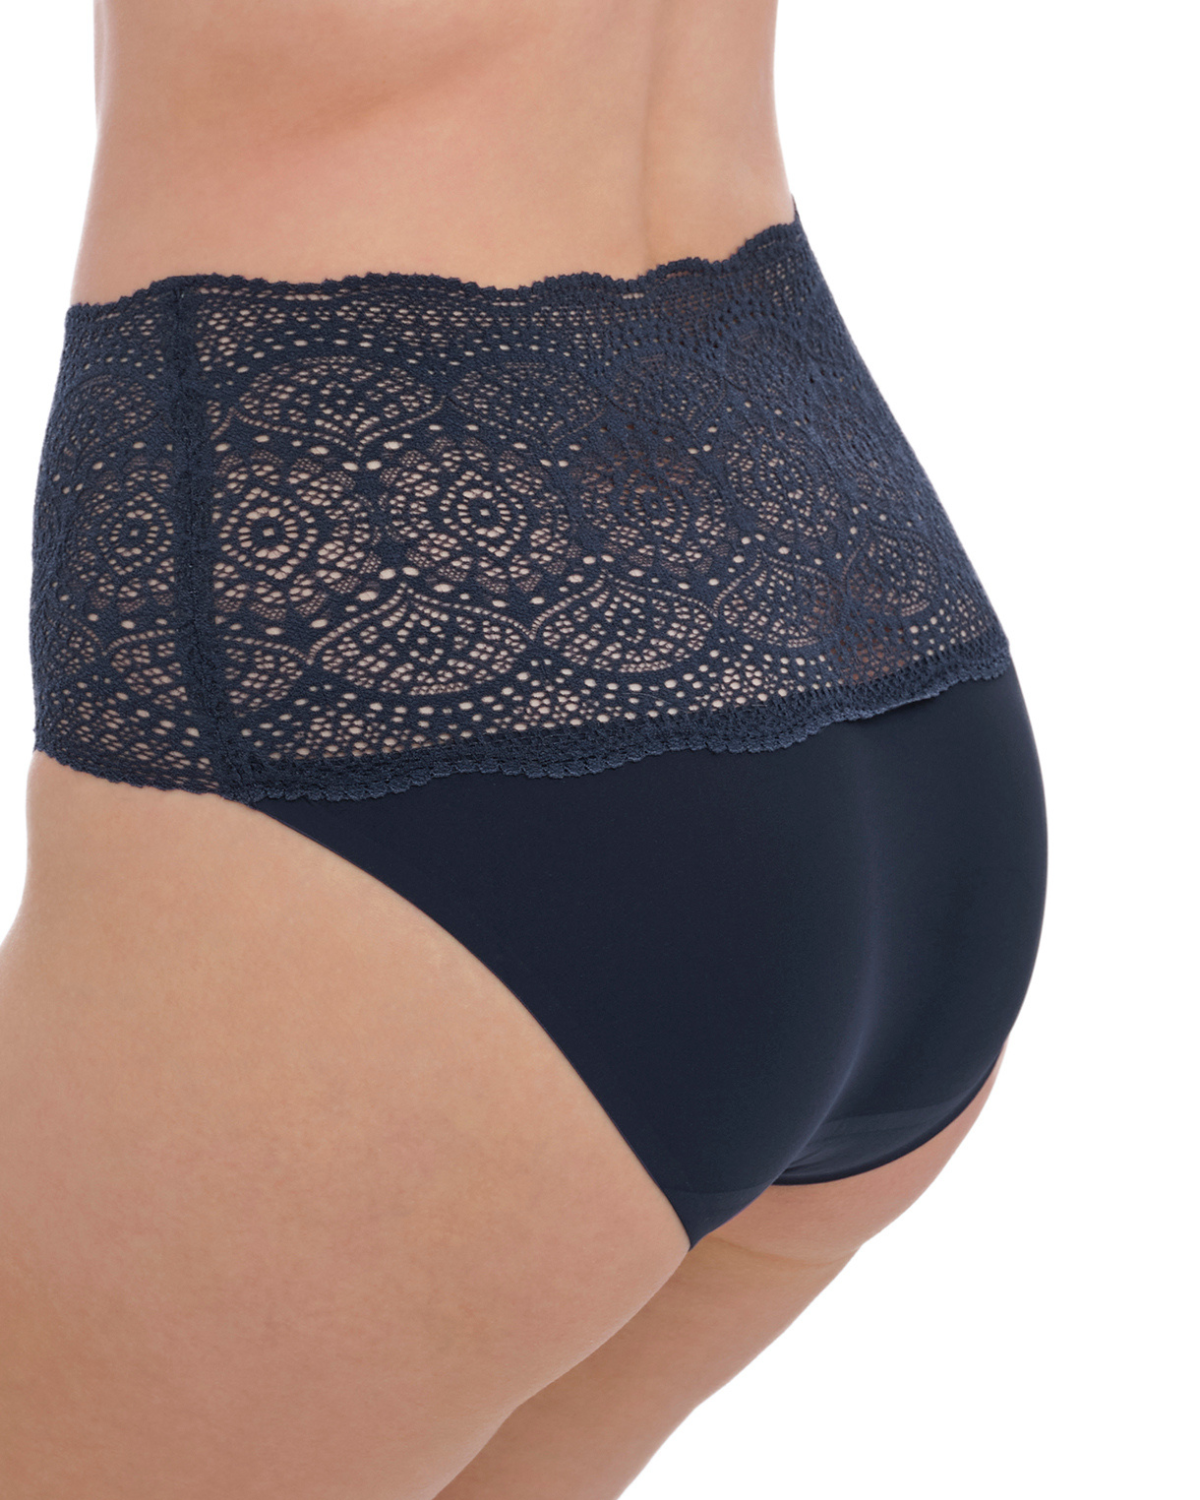 Model wearing a wide lace band brief panty in navy